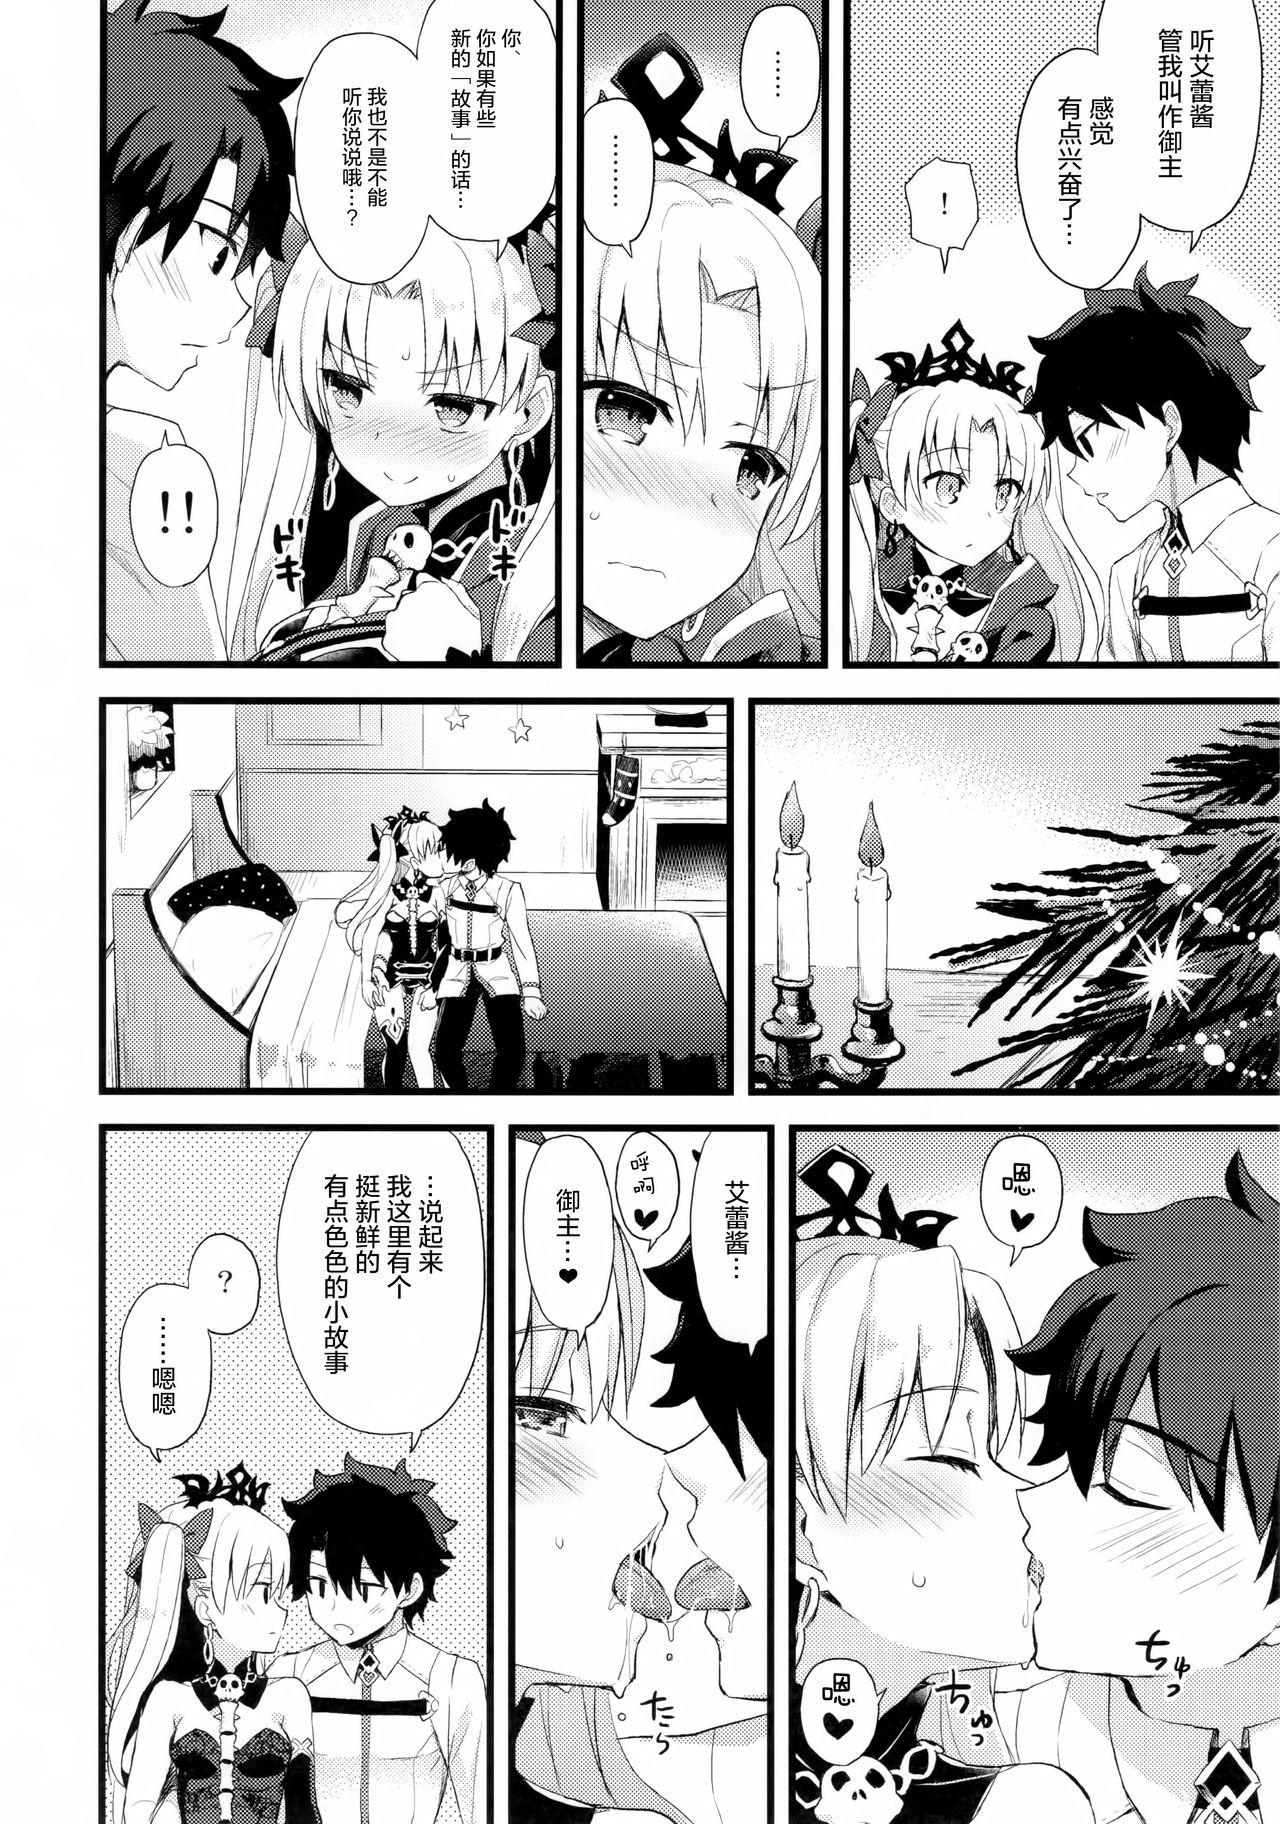 Femdom My Room de Ere-chan to. - Fate grand order Point Of View - Page 8